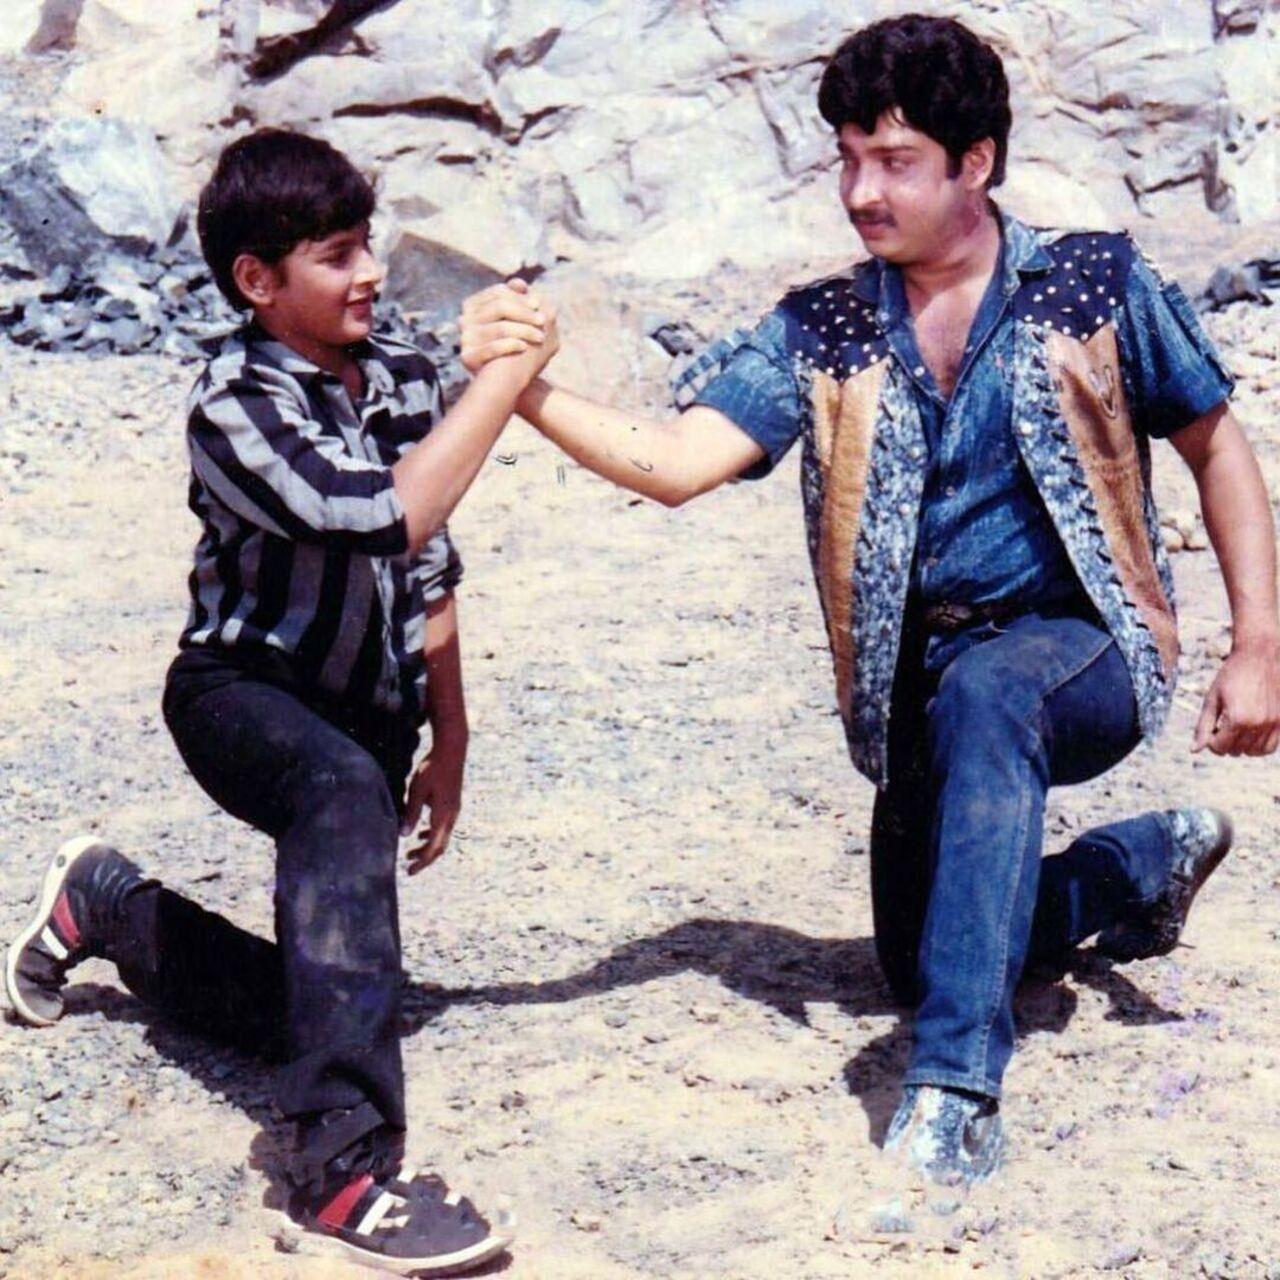 Mahesh Babu often walks down the memory lane. He has worked as a child artist on his late brother Ramesh's sets and often remembers the good old days